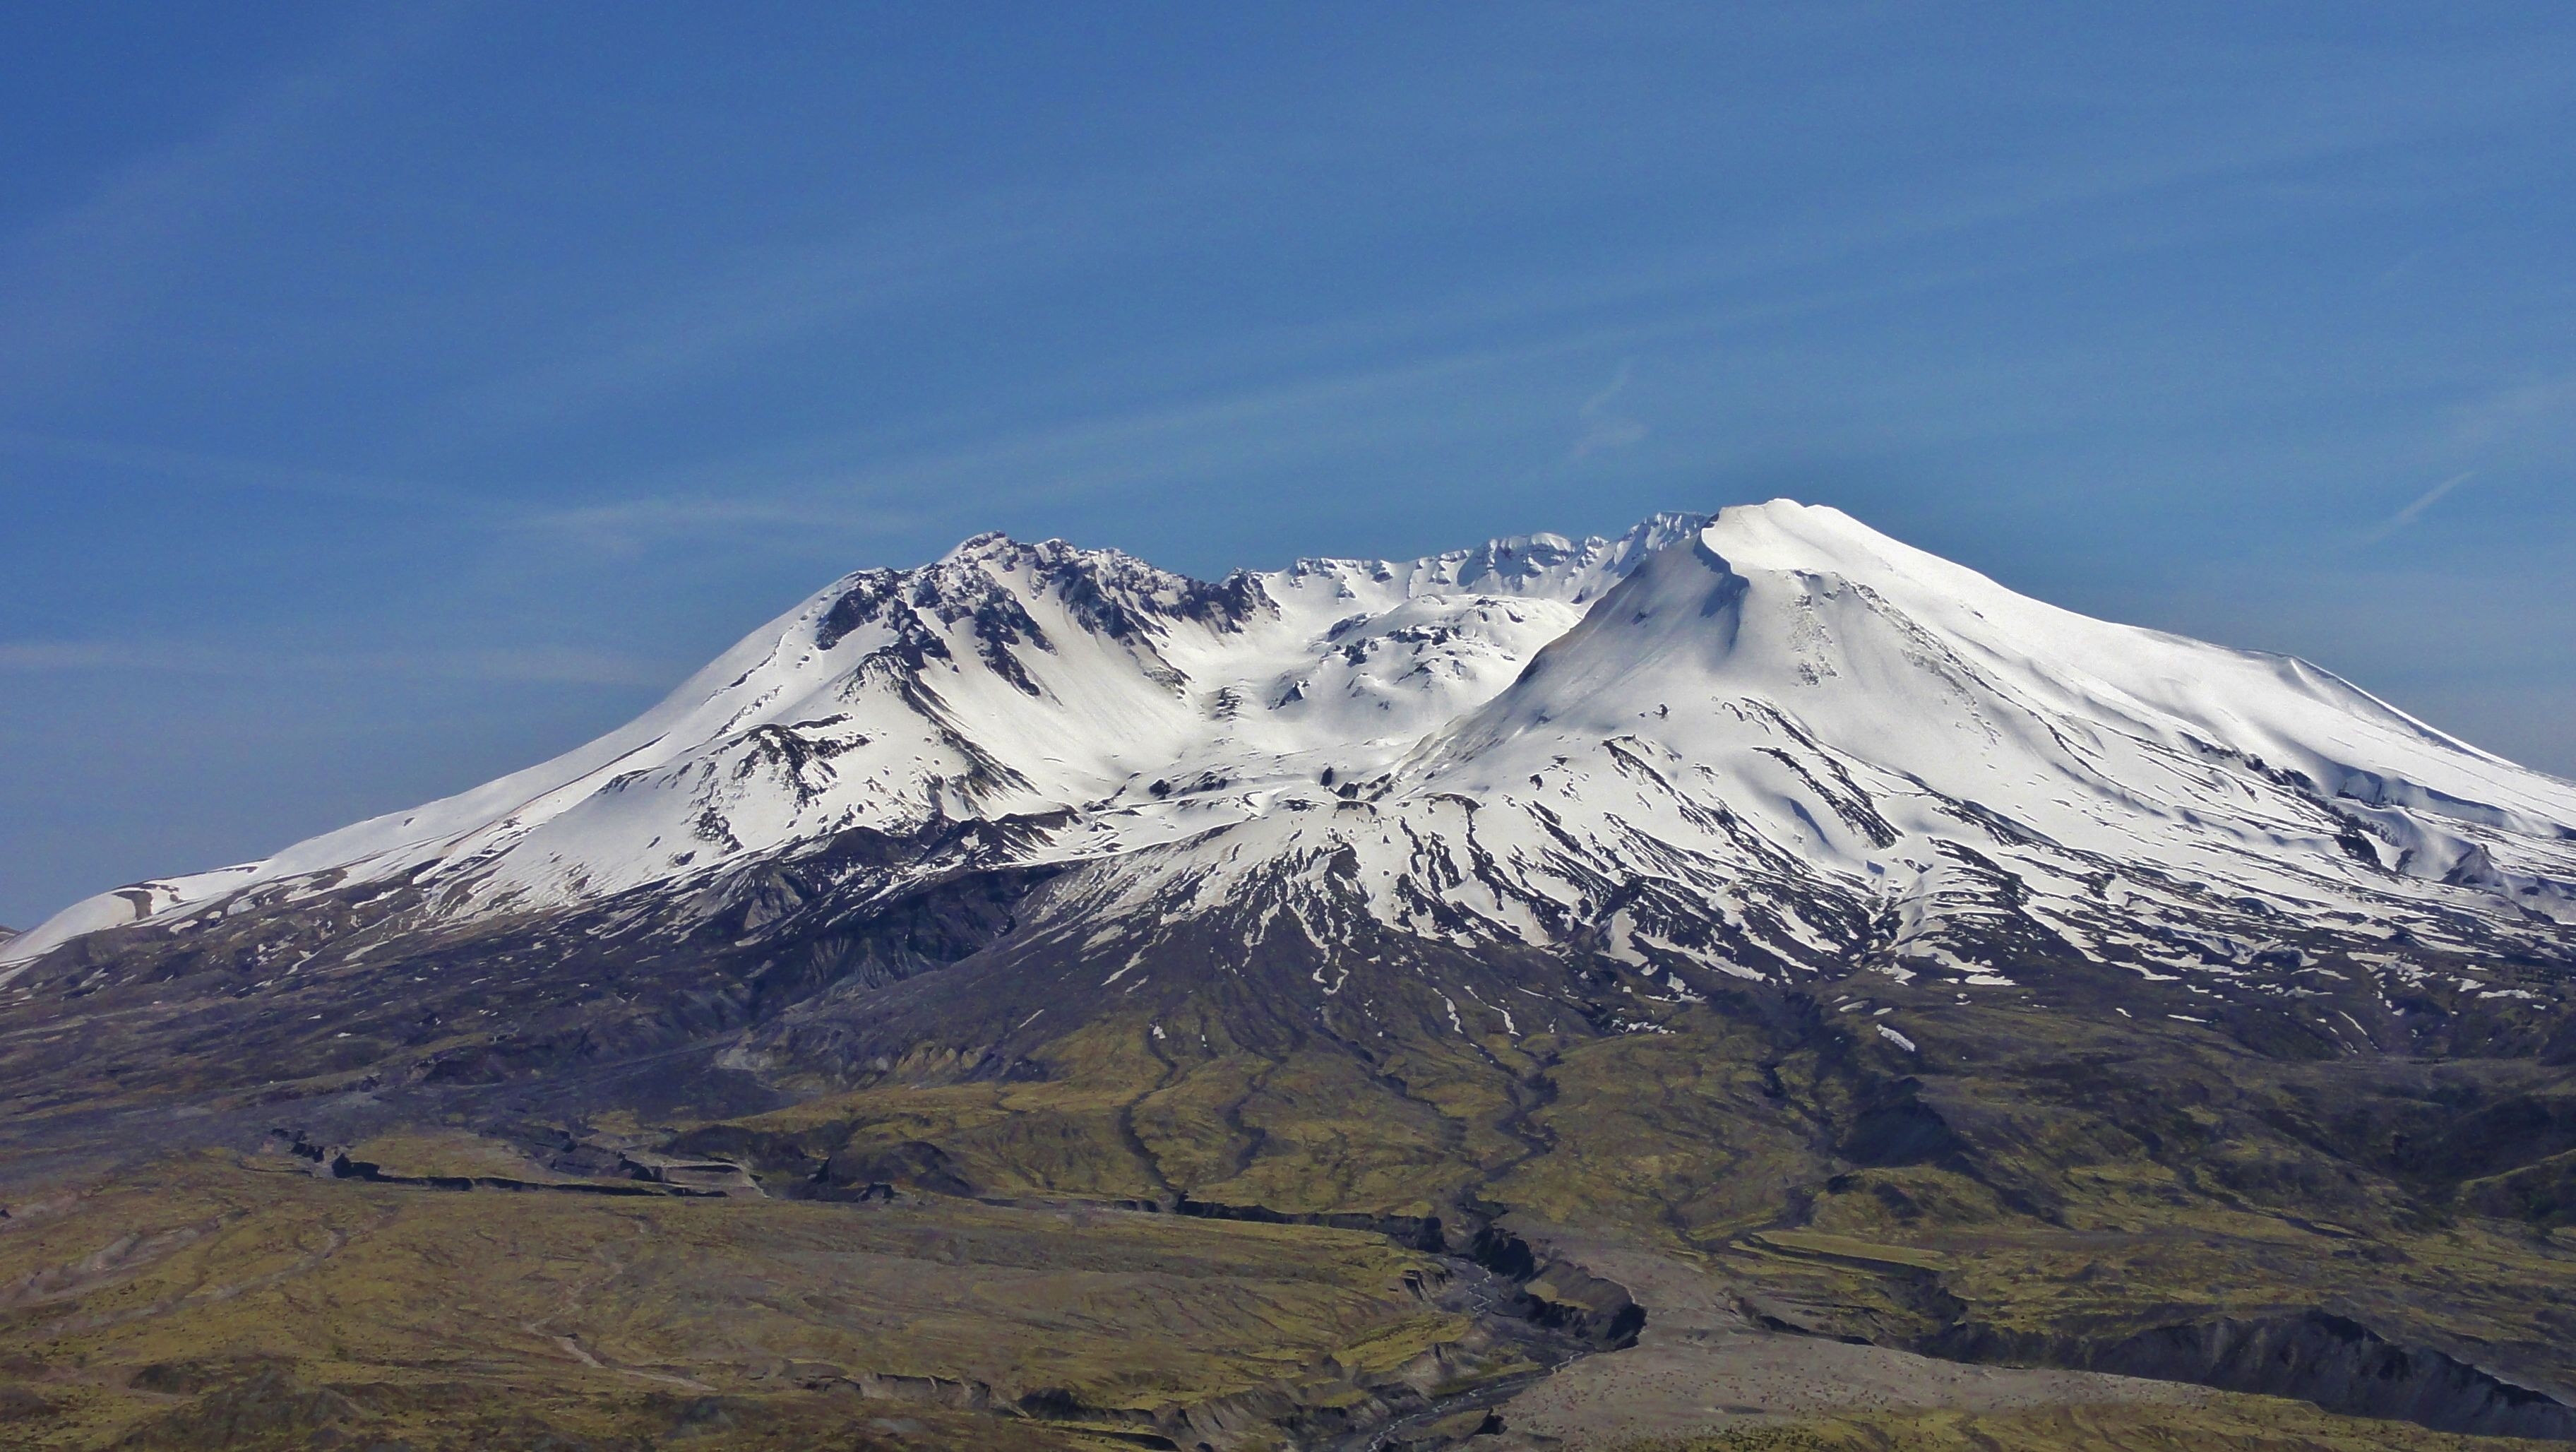 Mount St. Helens, Captivating wallpapers, Beautiful backgrounds, HD images, 3650x2060 HD Desktop